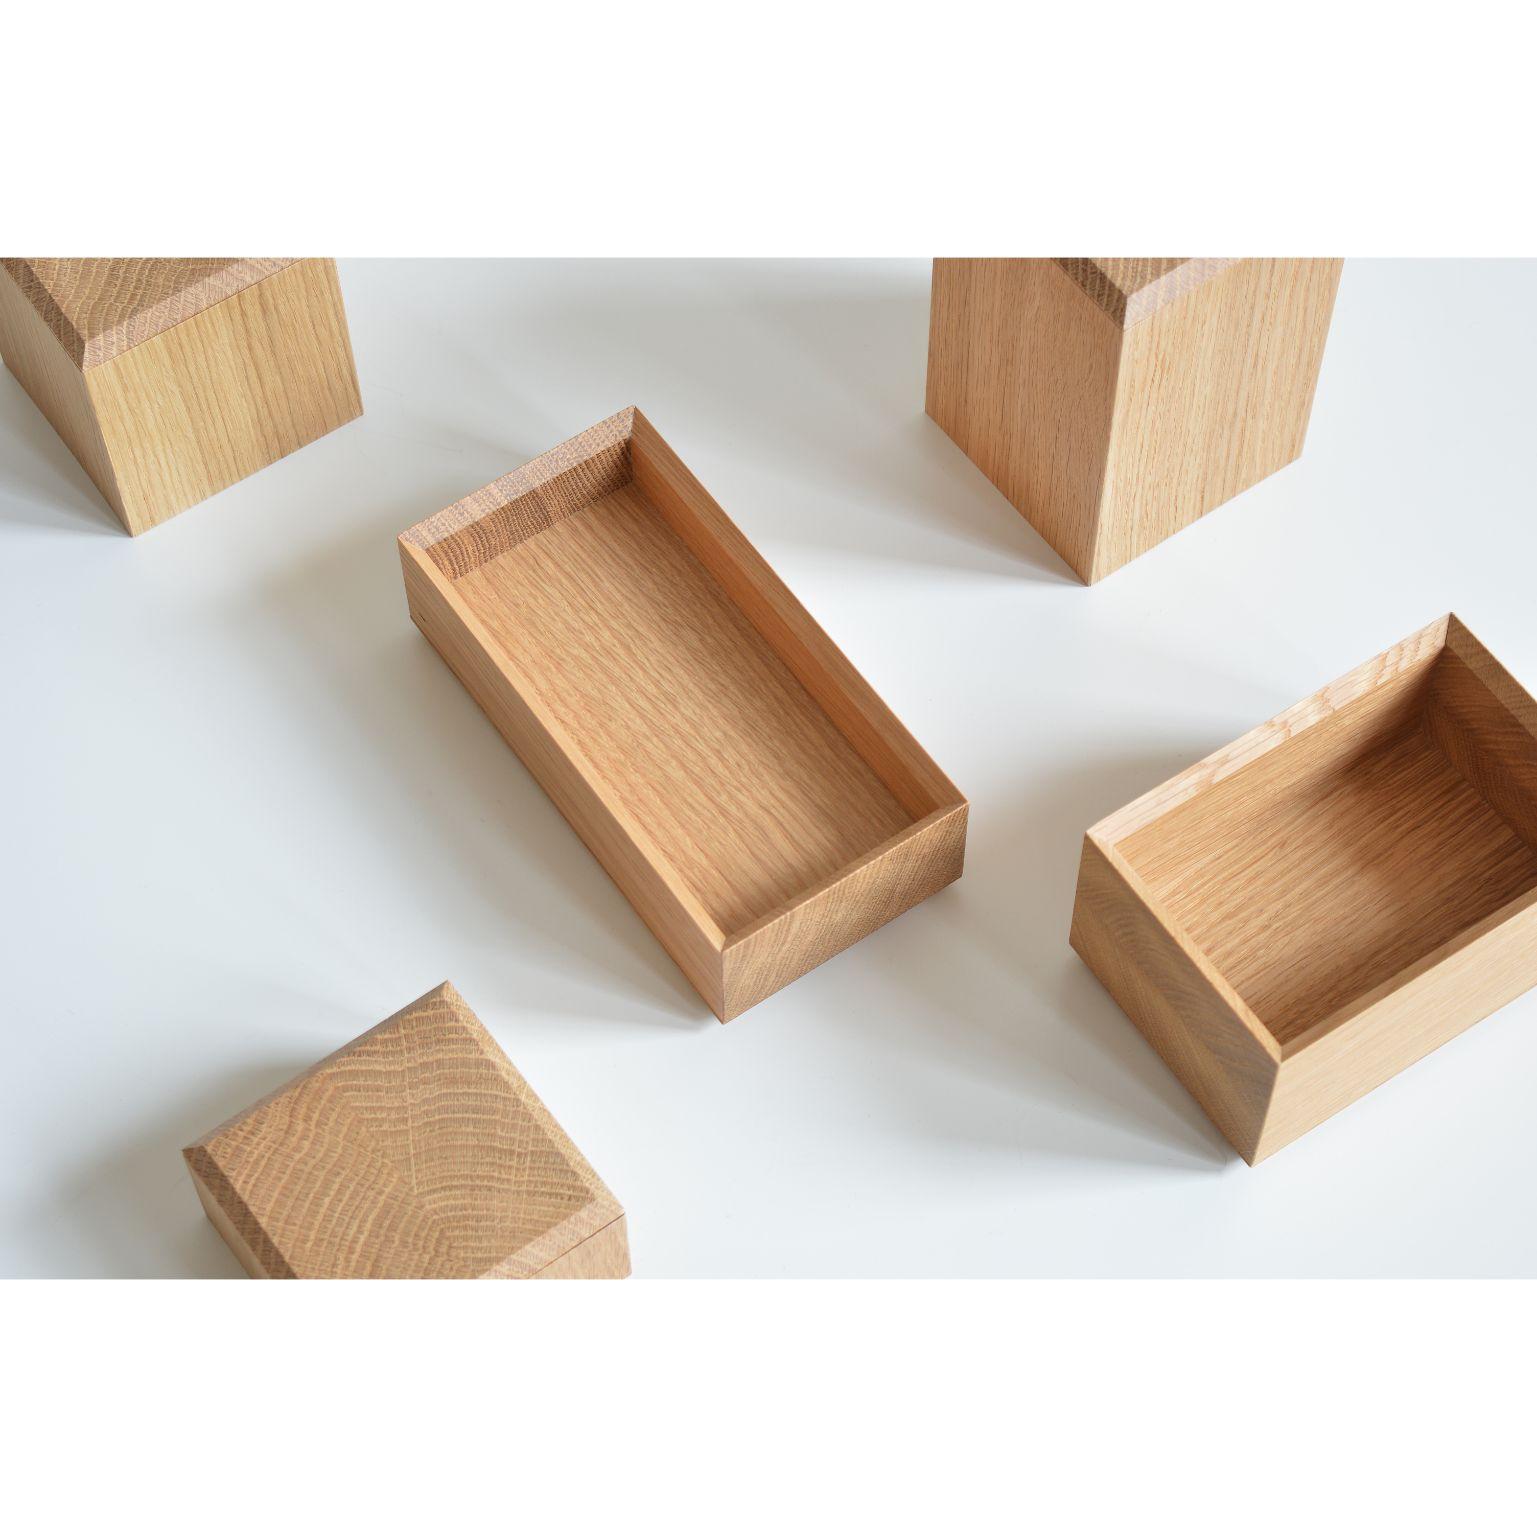 Finnish Set of 5 Pino Boxes by Antrei Hartikainen For Sale